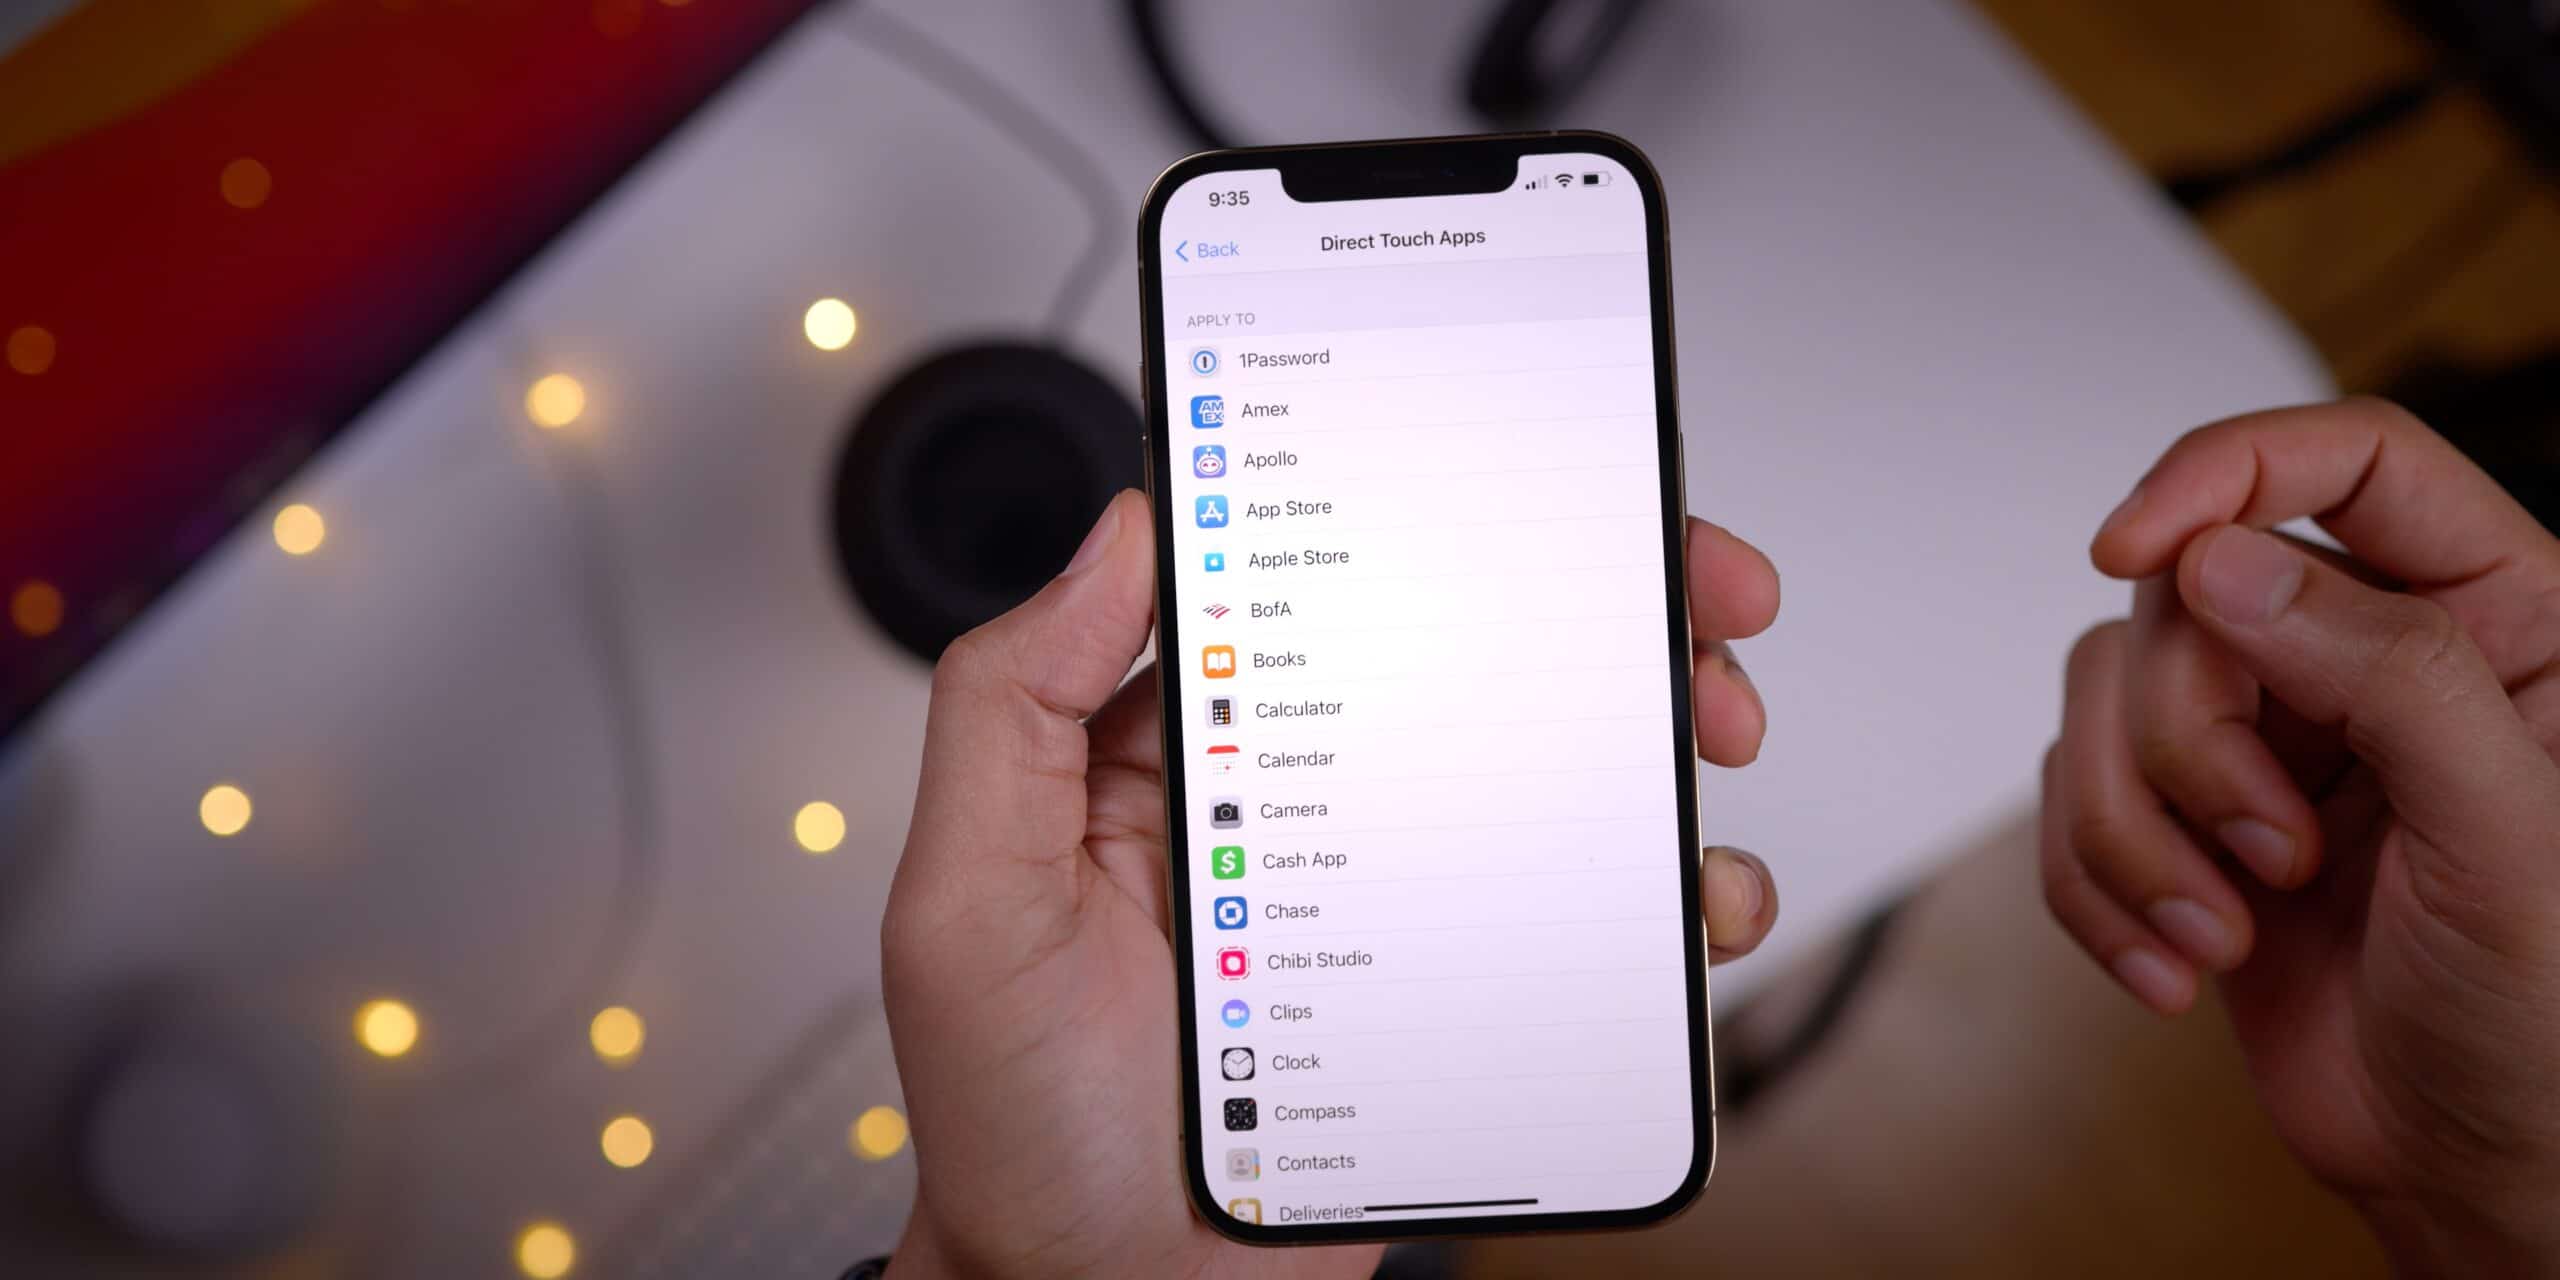 iOS 14.4: Direct Touch Apps